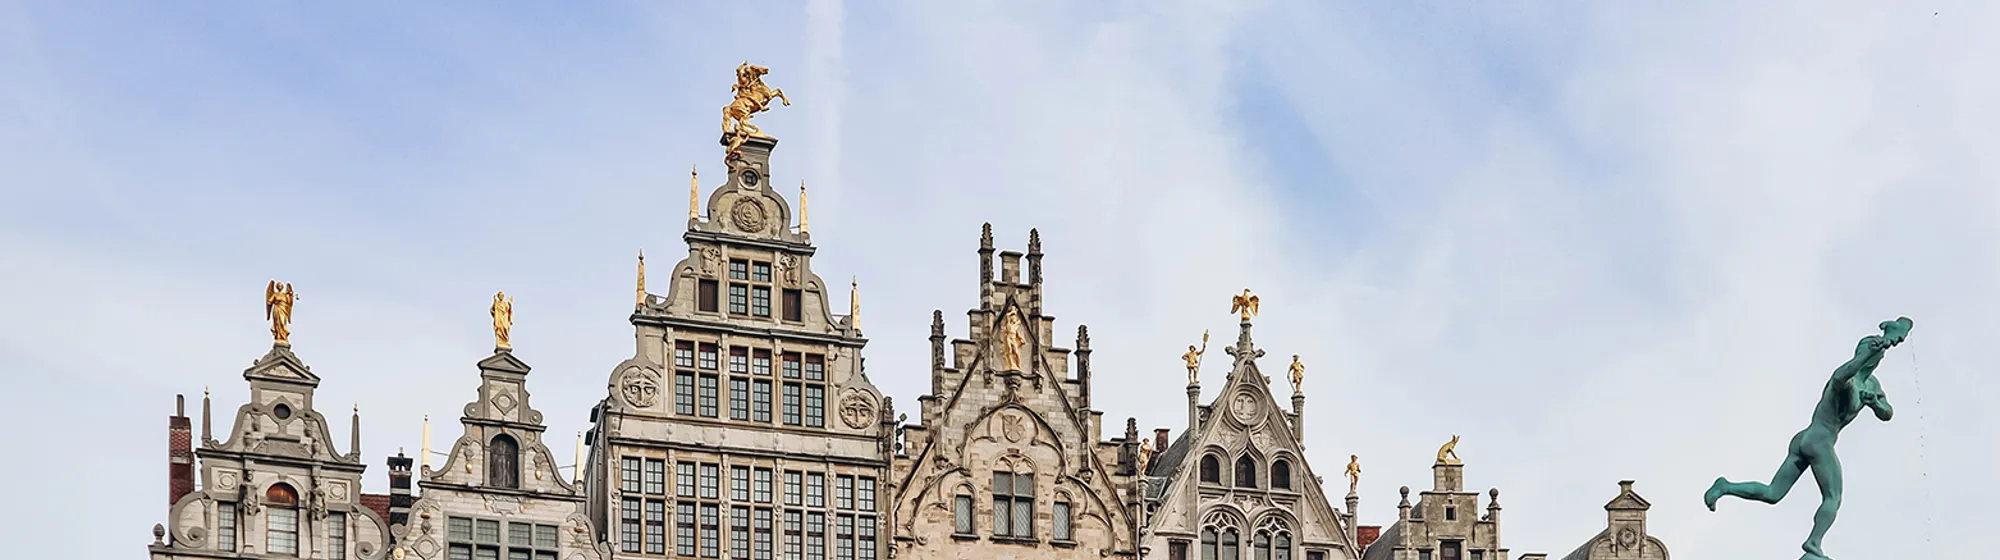 Antwerp Grote Markt with Statuary